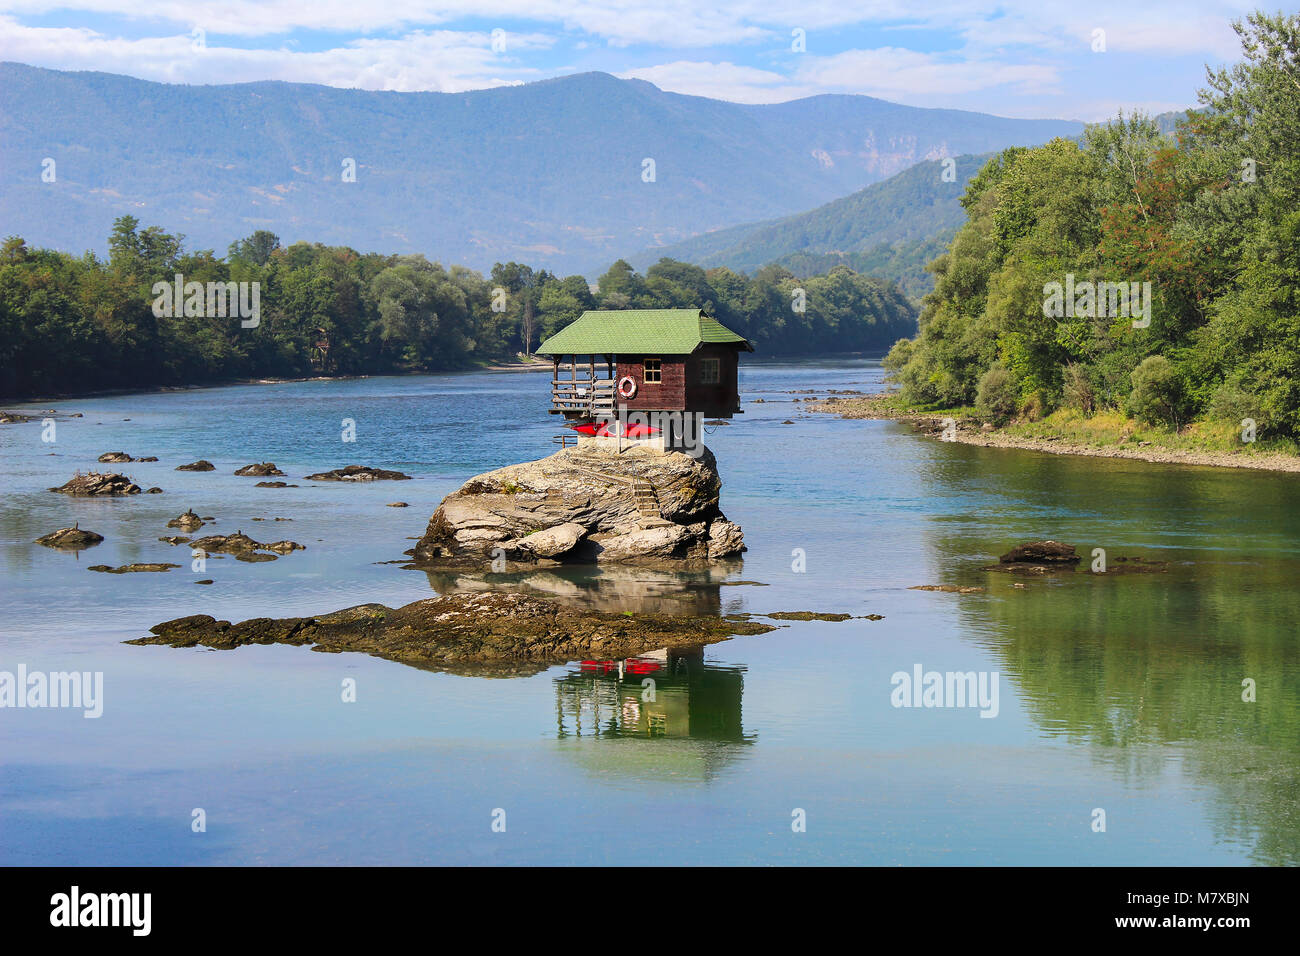 Unique colorful little house, built on the rock in the middle of Drina river in Serbia. One of the landmarks and touristic attractions of this area. Stock Photo